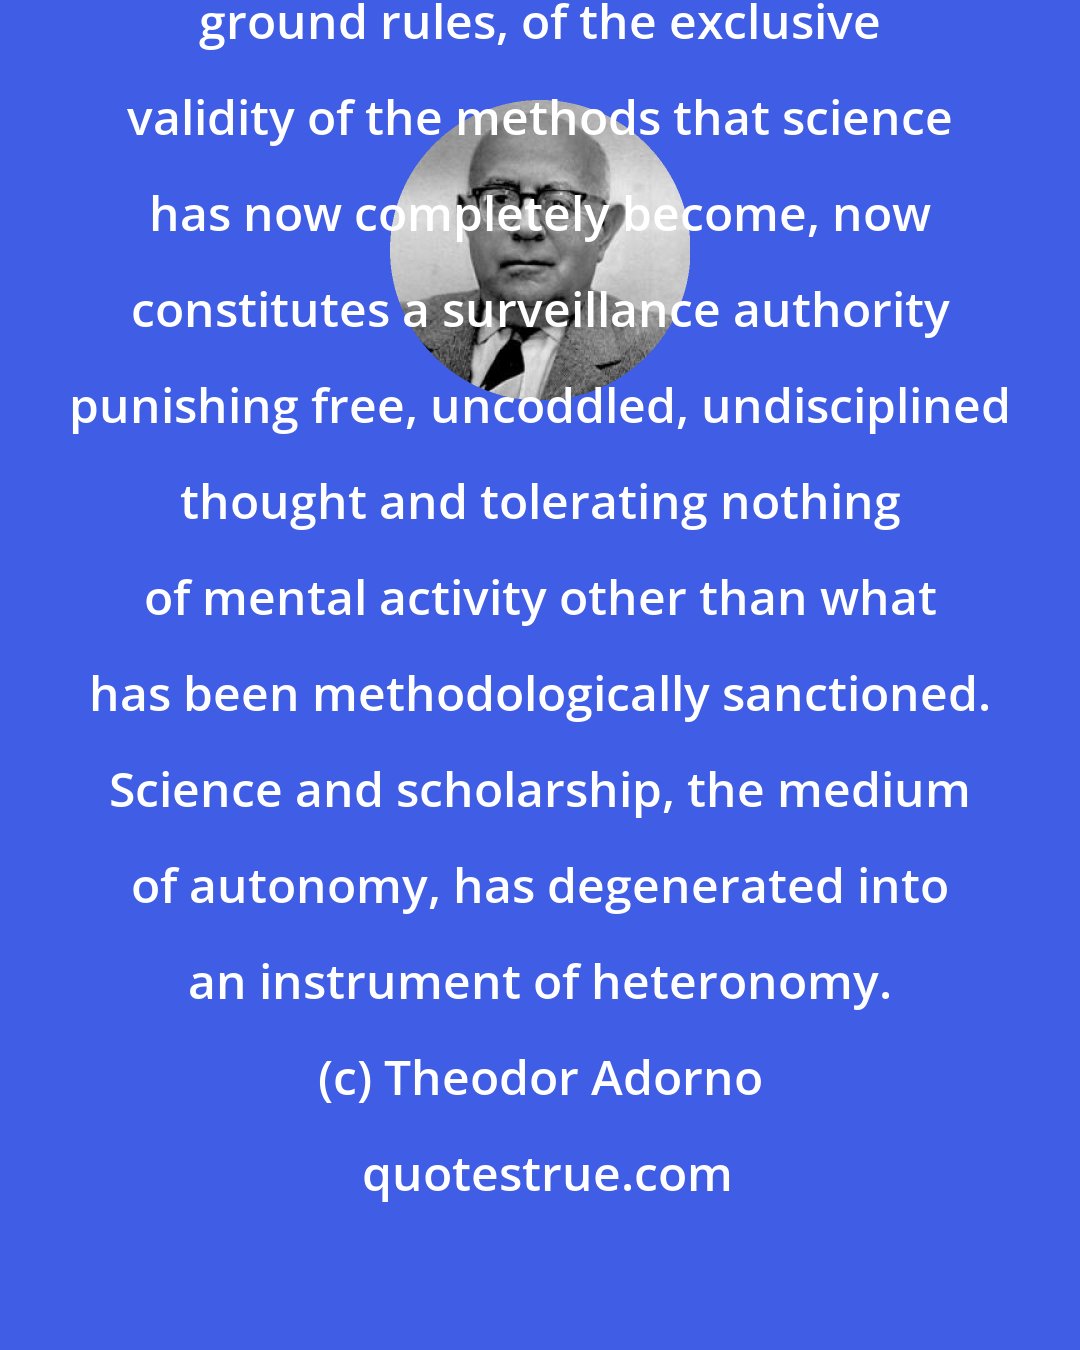 Theodor Adorno: The invocation of science, of its ground rules, of the exclusive validity of the methods that science has now completely become, now constitutes a surveillance authority punishing free, uncoddled, undisciplined thought and tolerating nothing of mental activity other than what has been methodologically sanctioned. Science and scholarship, the medium of autonomy, has degenerated into an instrument of heteronomy.